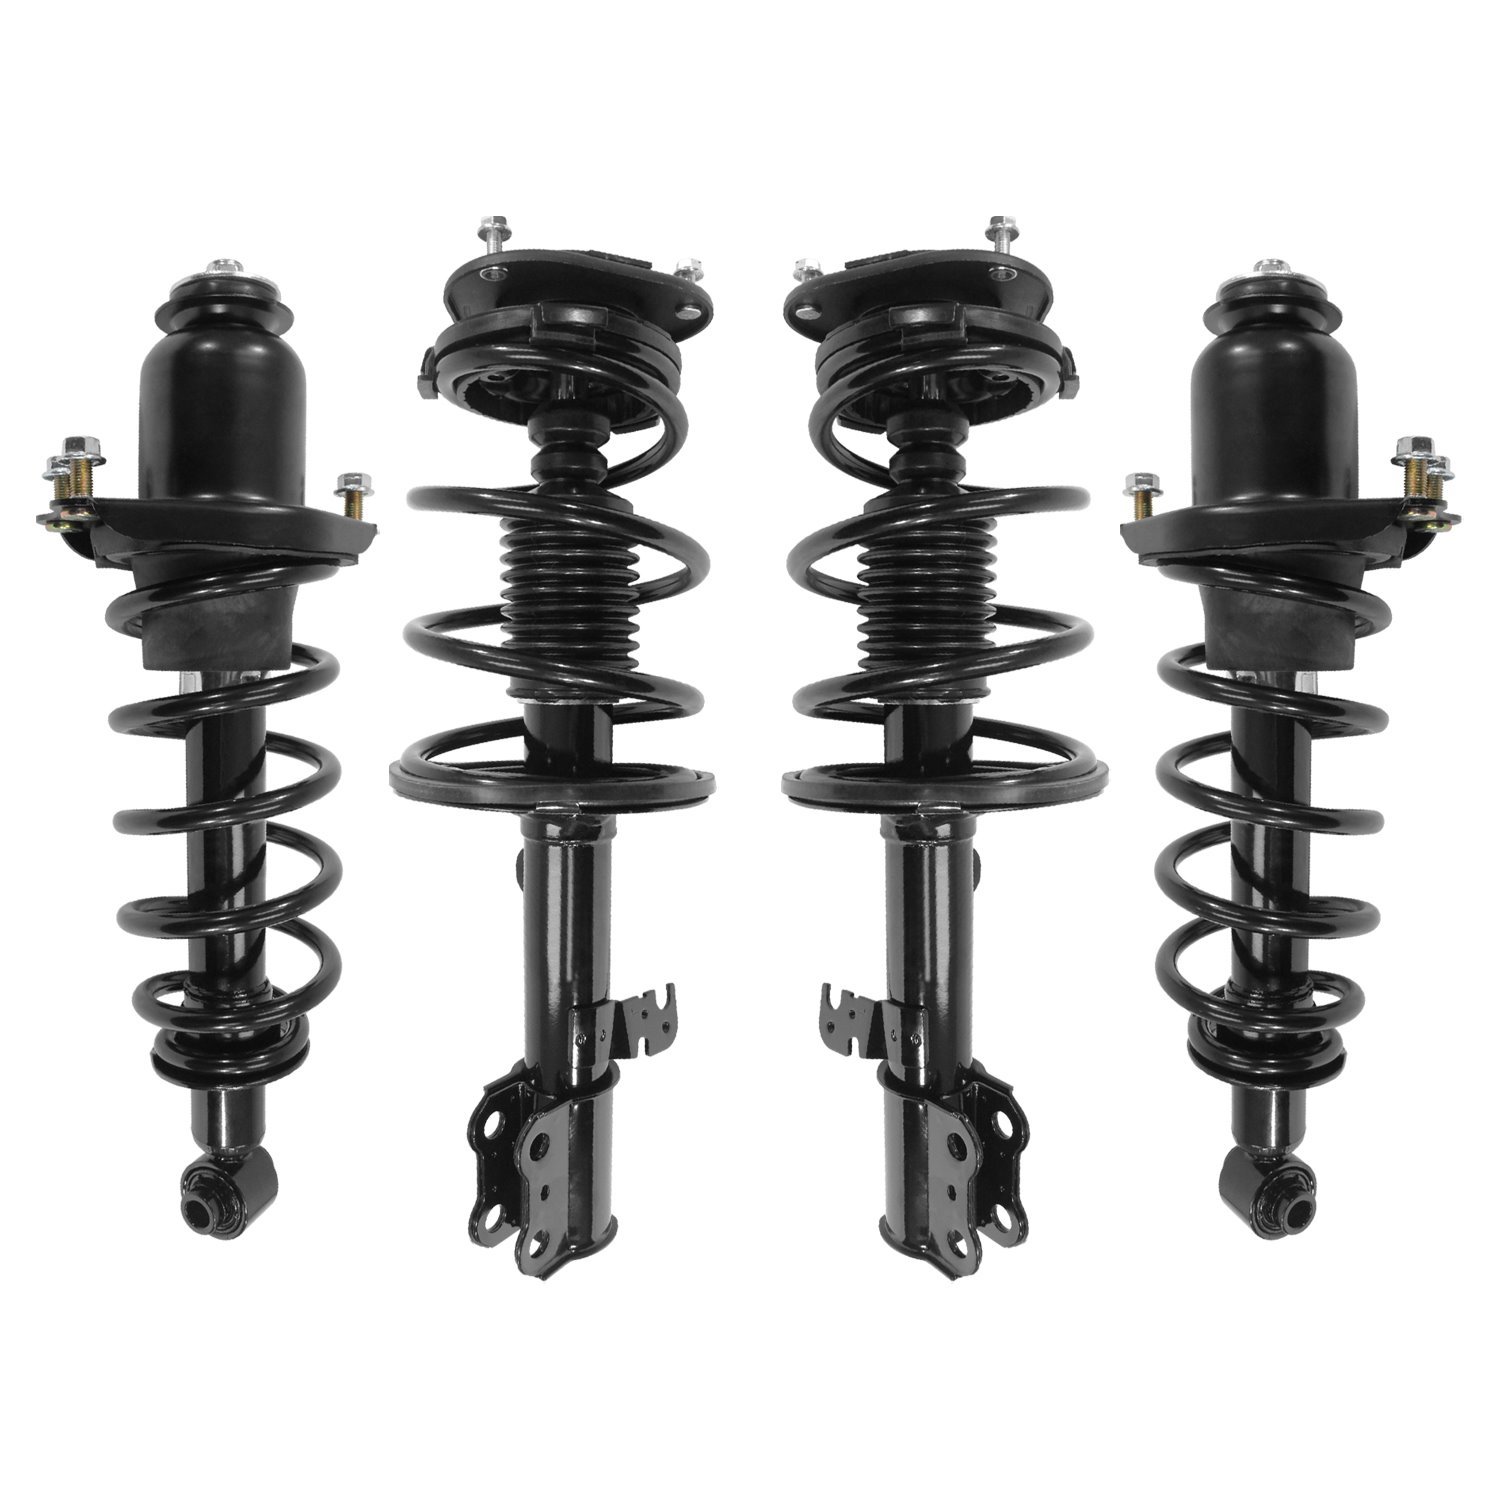 4-13031-15981-001 Front & Rear Suspension Strut & Coil Spring Assembly Kit Fits Select Toyota Celica